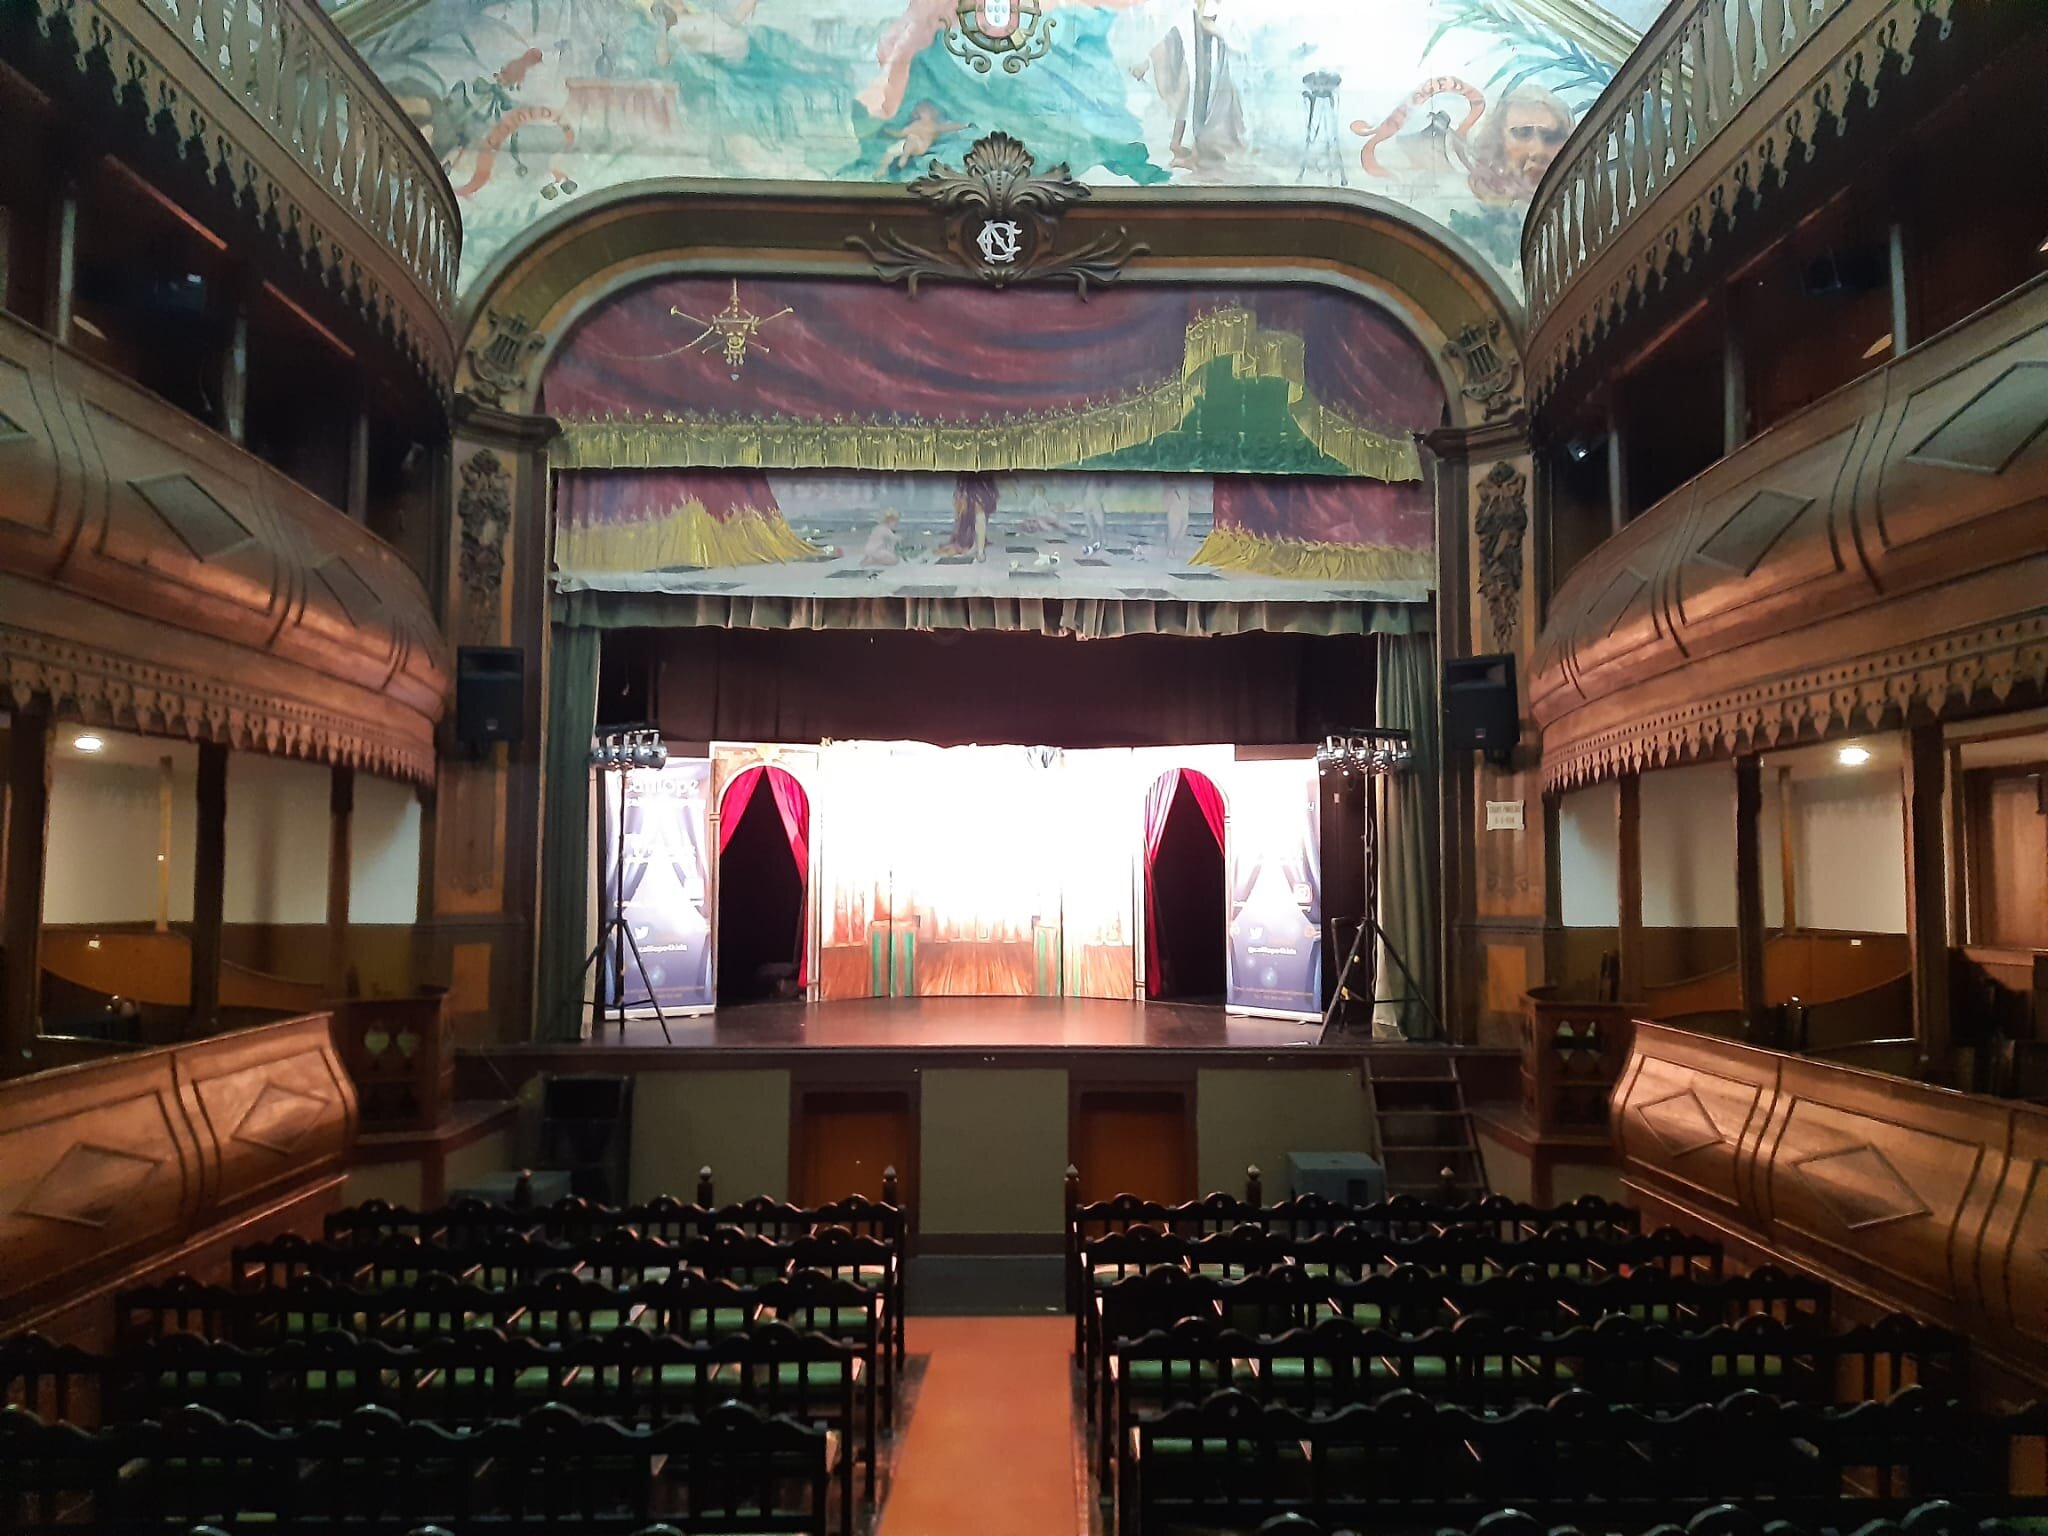 A few months ago, we had the privilege of performing in this Beautiful theatre in Nazar&eacute;. A true hidden gem! What do you think?

 #educationaltheatre #childrenstheater #theatre #musicaltheater #childrenstheatre #educationaltheater #teatroeduca